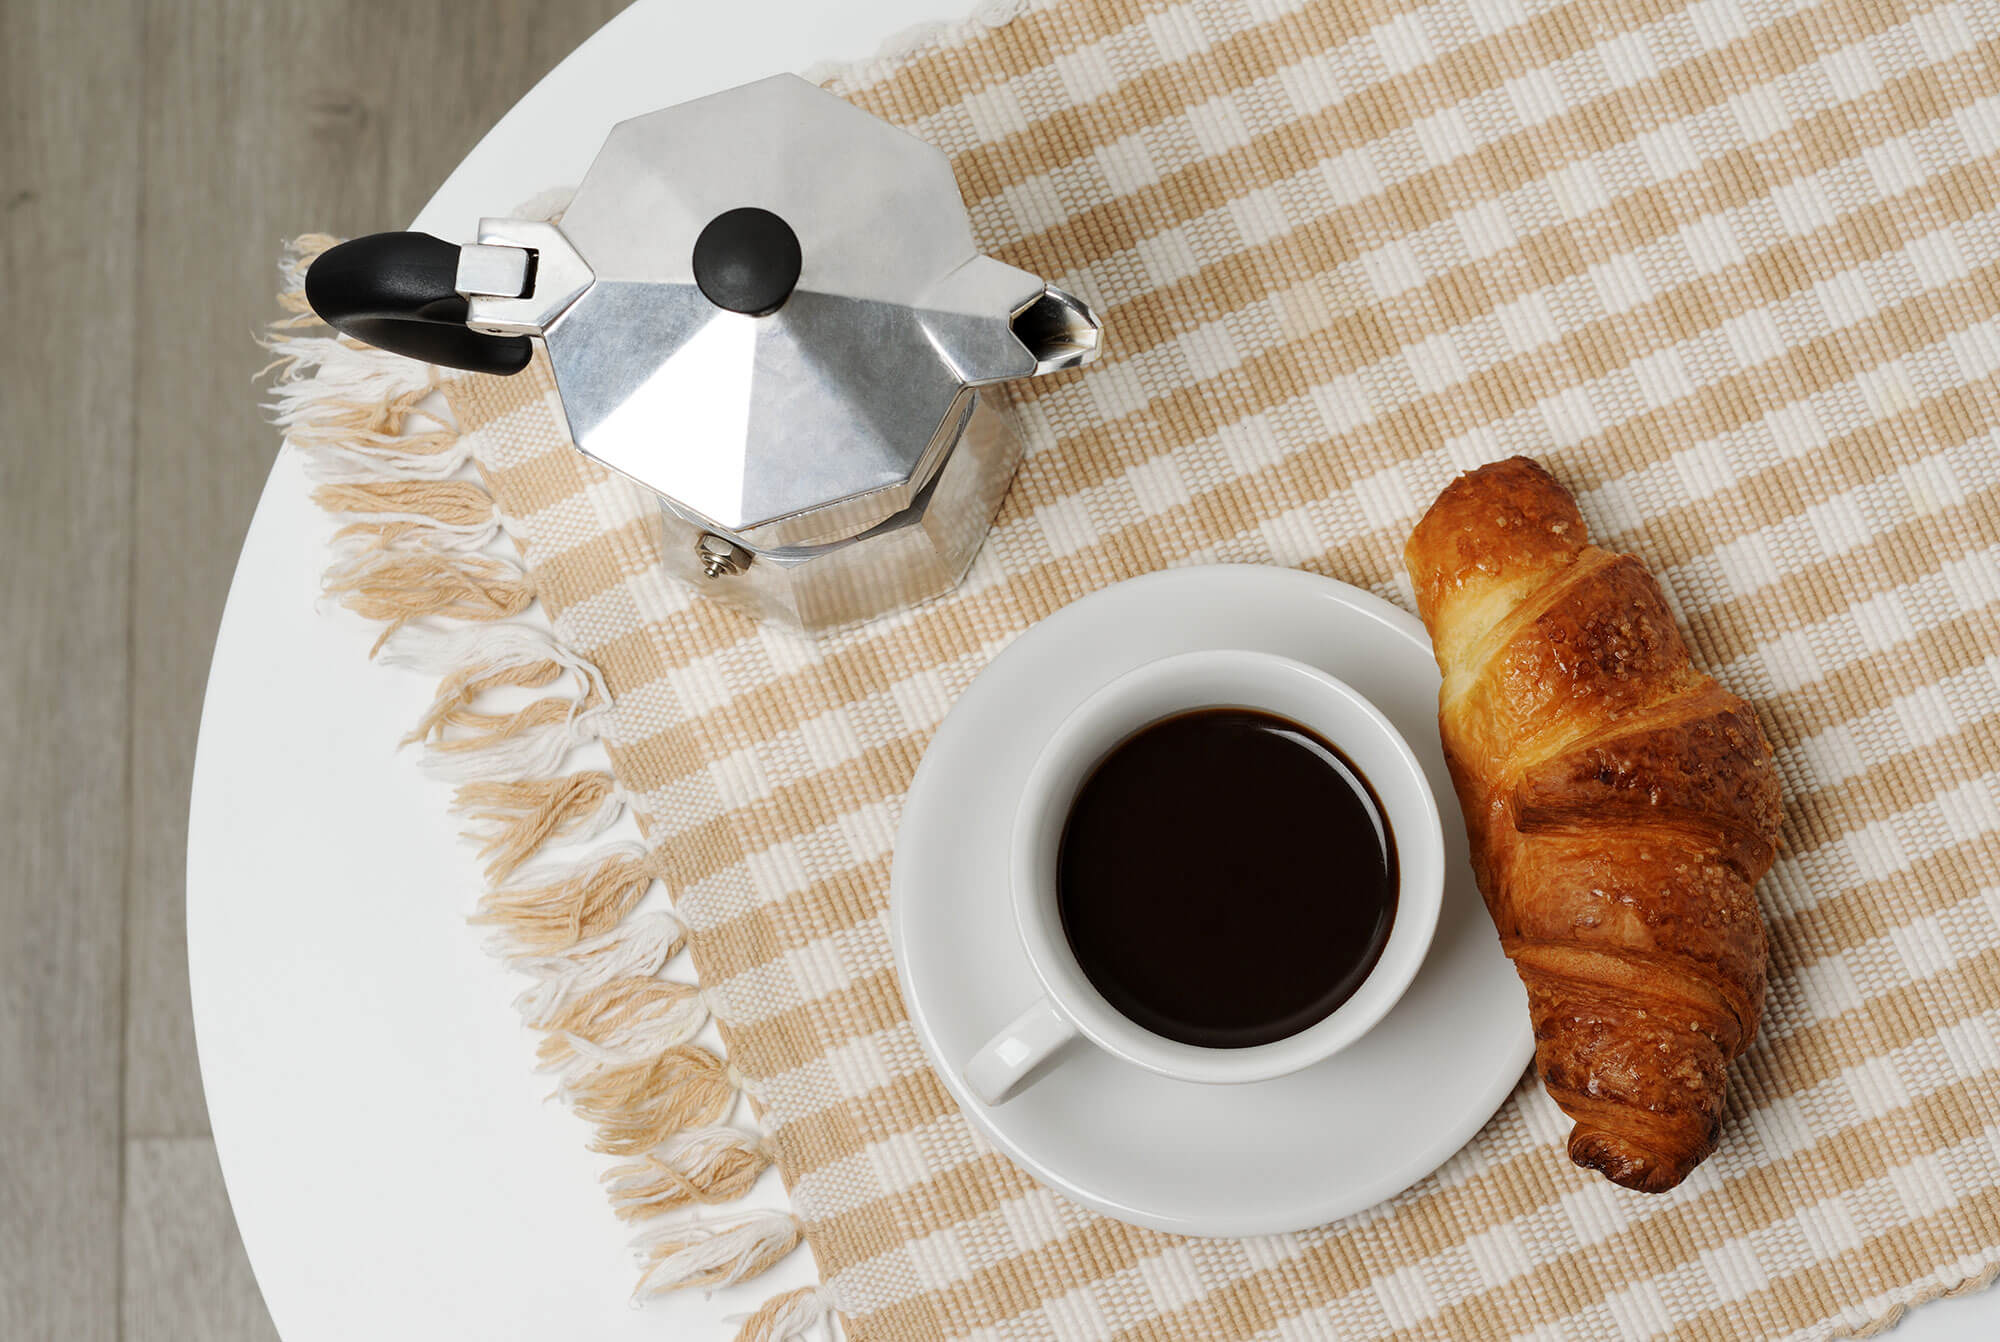 There’s no better way to start a morning than with a croissant and coffee – and that’s not just because, as Bridget Jones says, ‘started having hazelnut pastry and chocolate croissant every morning, and lost loads of weight. So will have cappuccino and croissant as usual.’